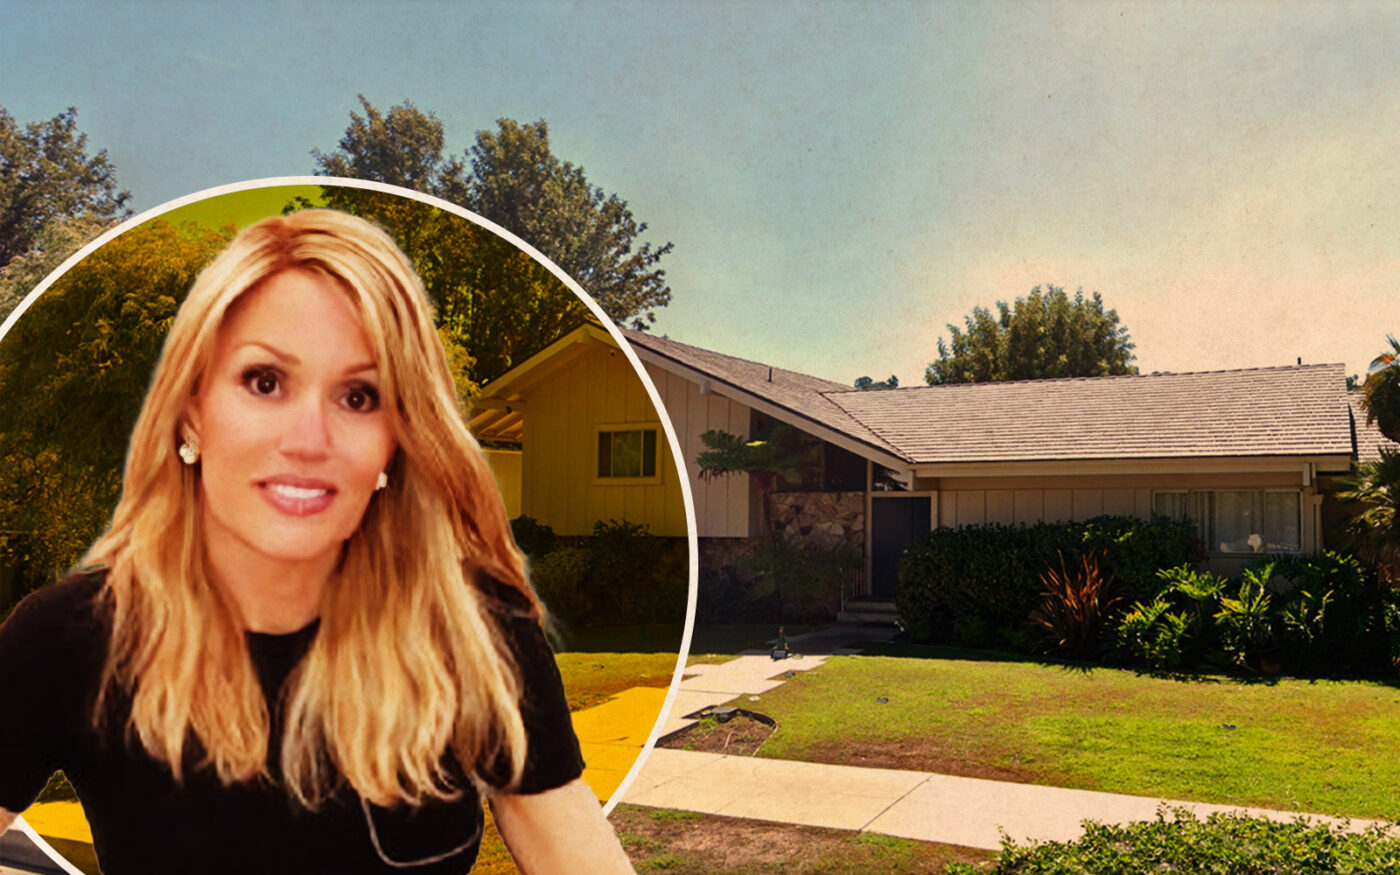 Art collector Tina Trahan Buys “Brady Bunch” Home for $3.2M